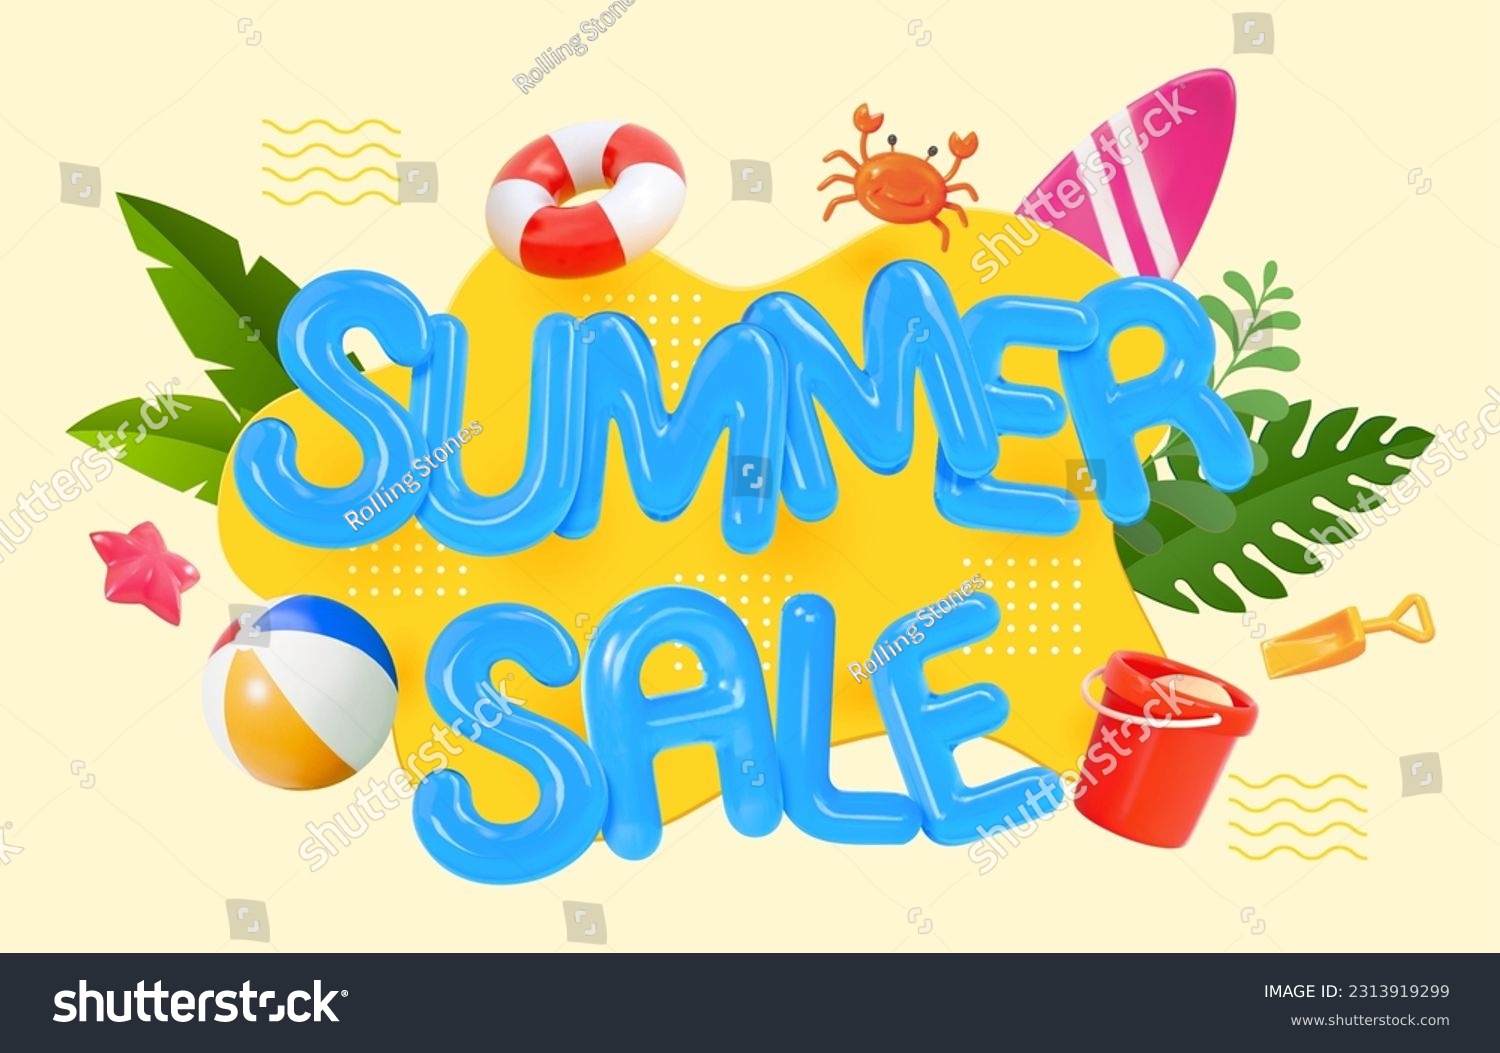 SVG of 3D illustrated summer sale balloon text surrounded by summer beach vacation elements on light yellow background. svg